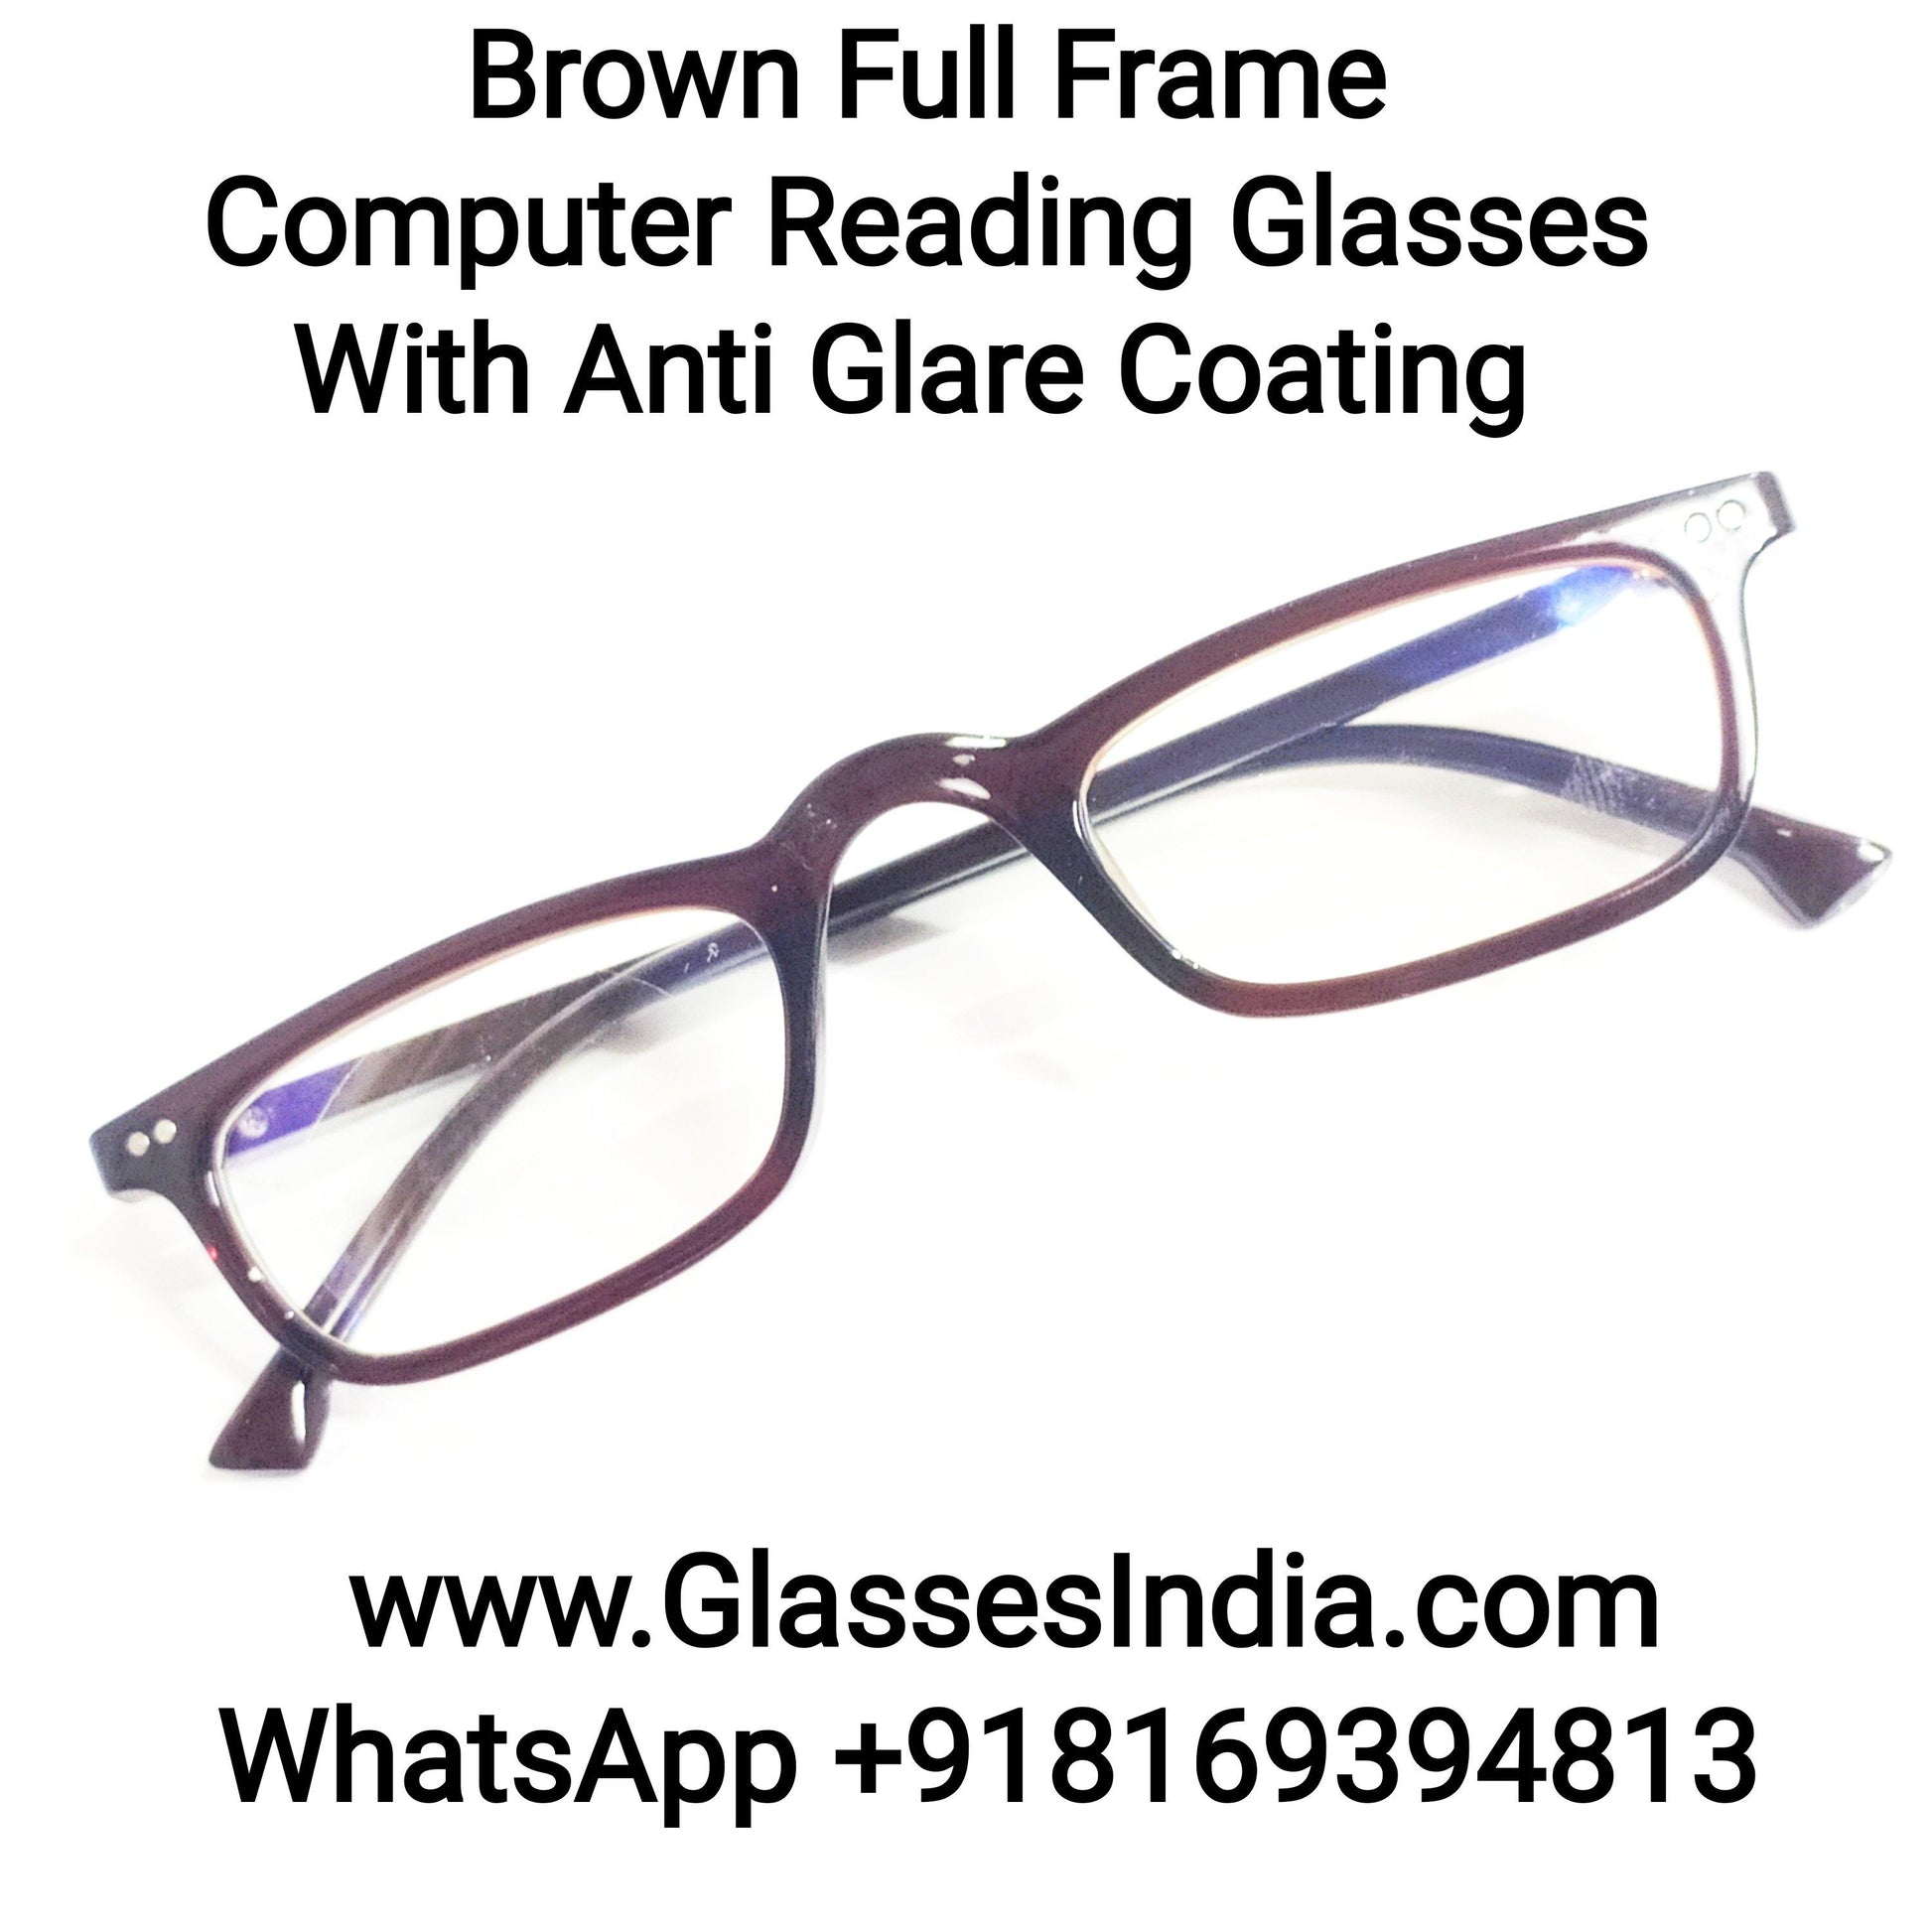 Buy Brown Full Frame Computer Reading Glasses with Anti Glare Coating Power 2.50 - Glasses India Online in India